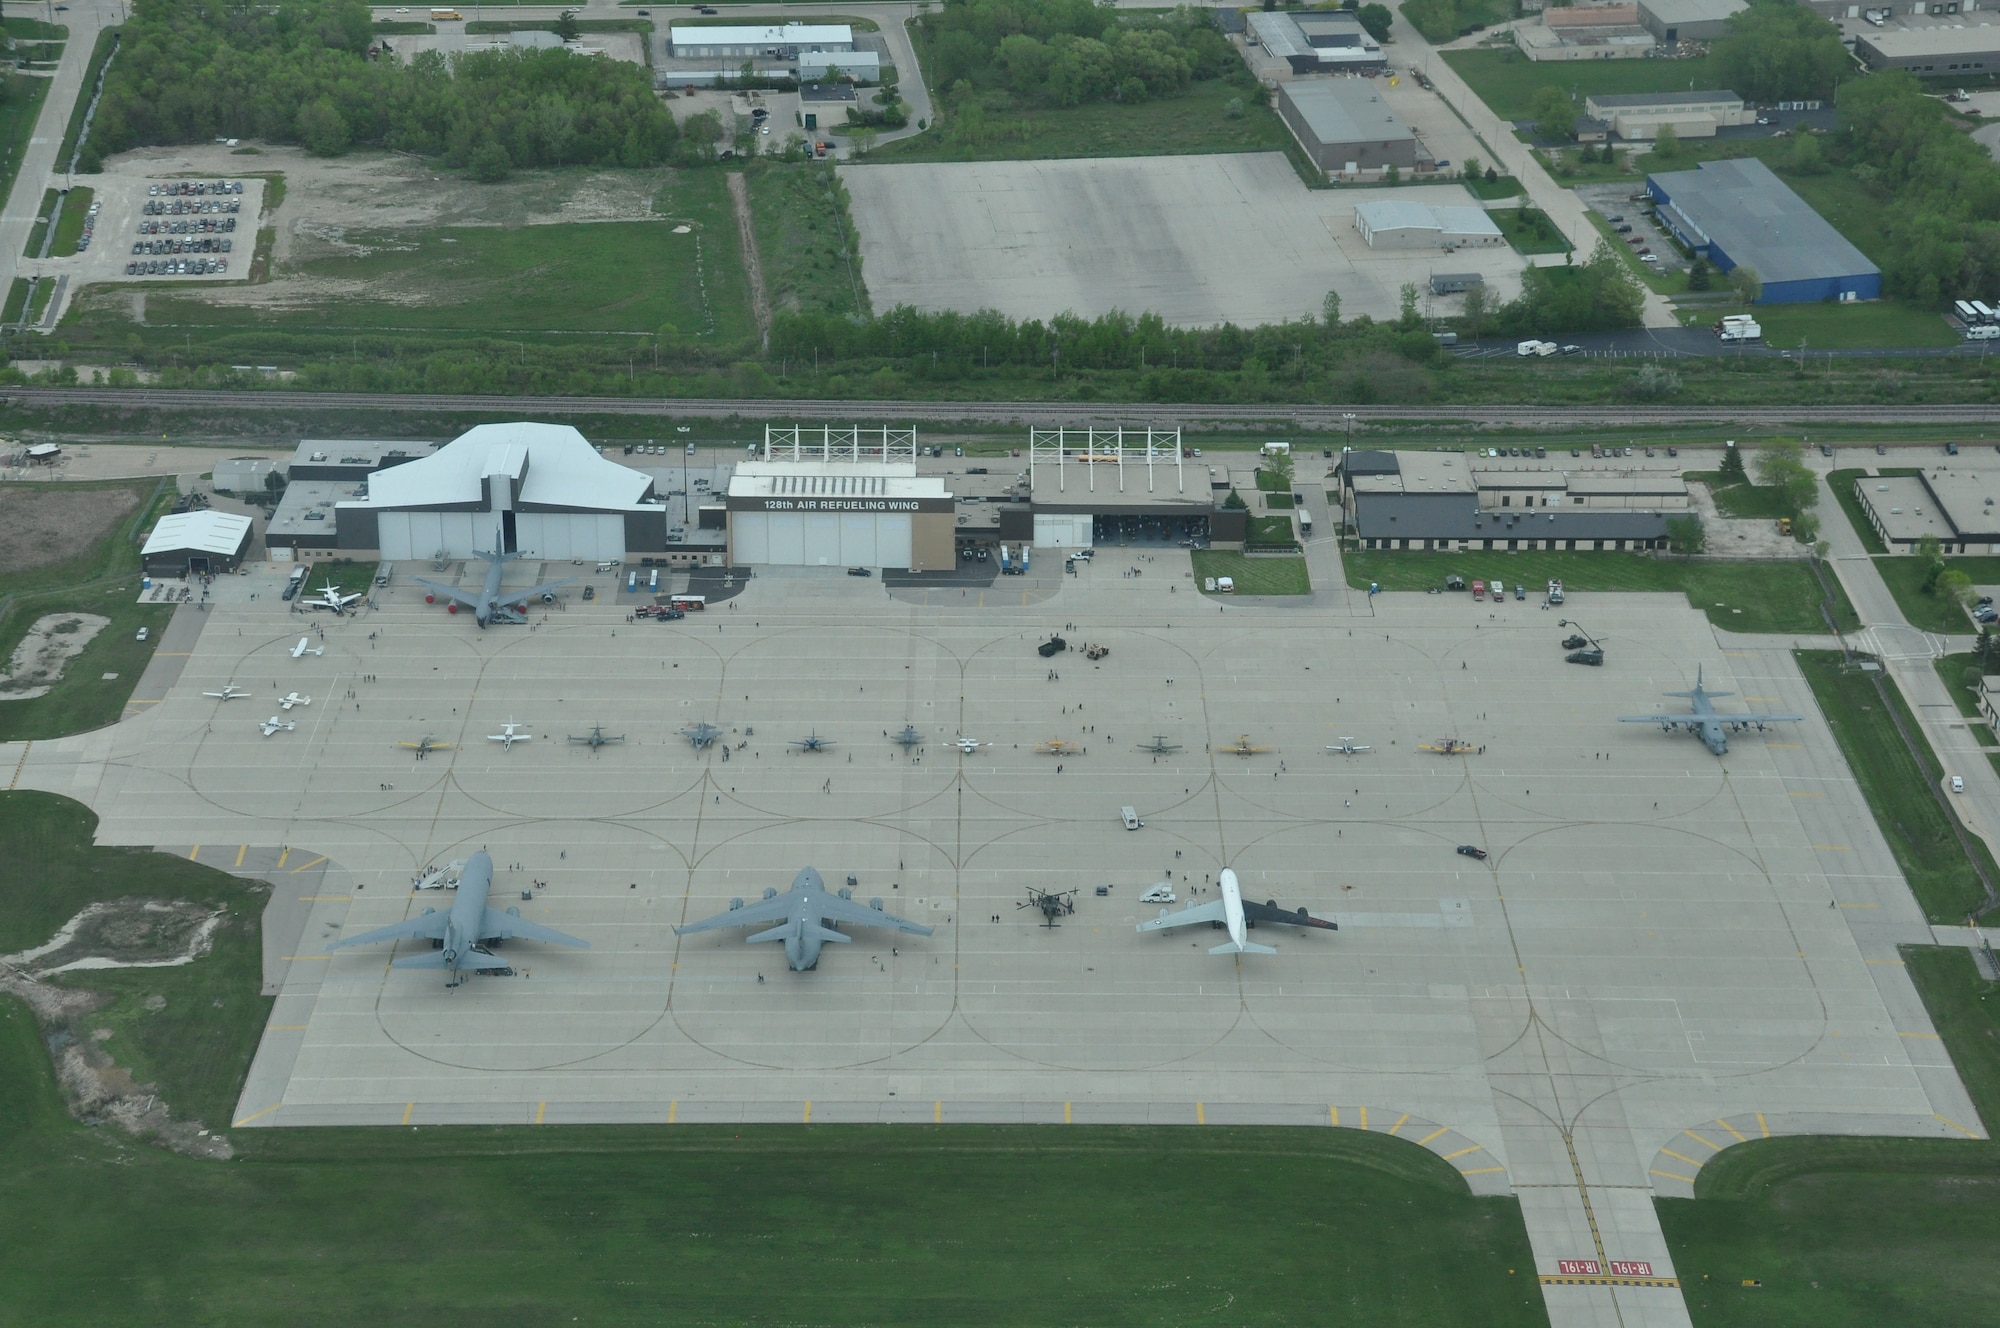 An aerial view of the 128th Air Refueling Wing, Milwaukee, as members of the general public are given the chance to tour military aircraft, talk with military personal, and look at stands set up inside of a hangar on 12 May, 2012. The military display ran from May 12th - May 13th as an opening event for the 2012 Armed Forces Week experience. U.S. Air Force photo by Staff Sgt. Jeremy Wilson 